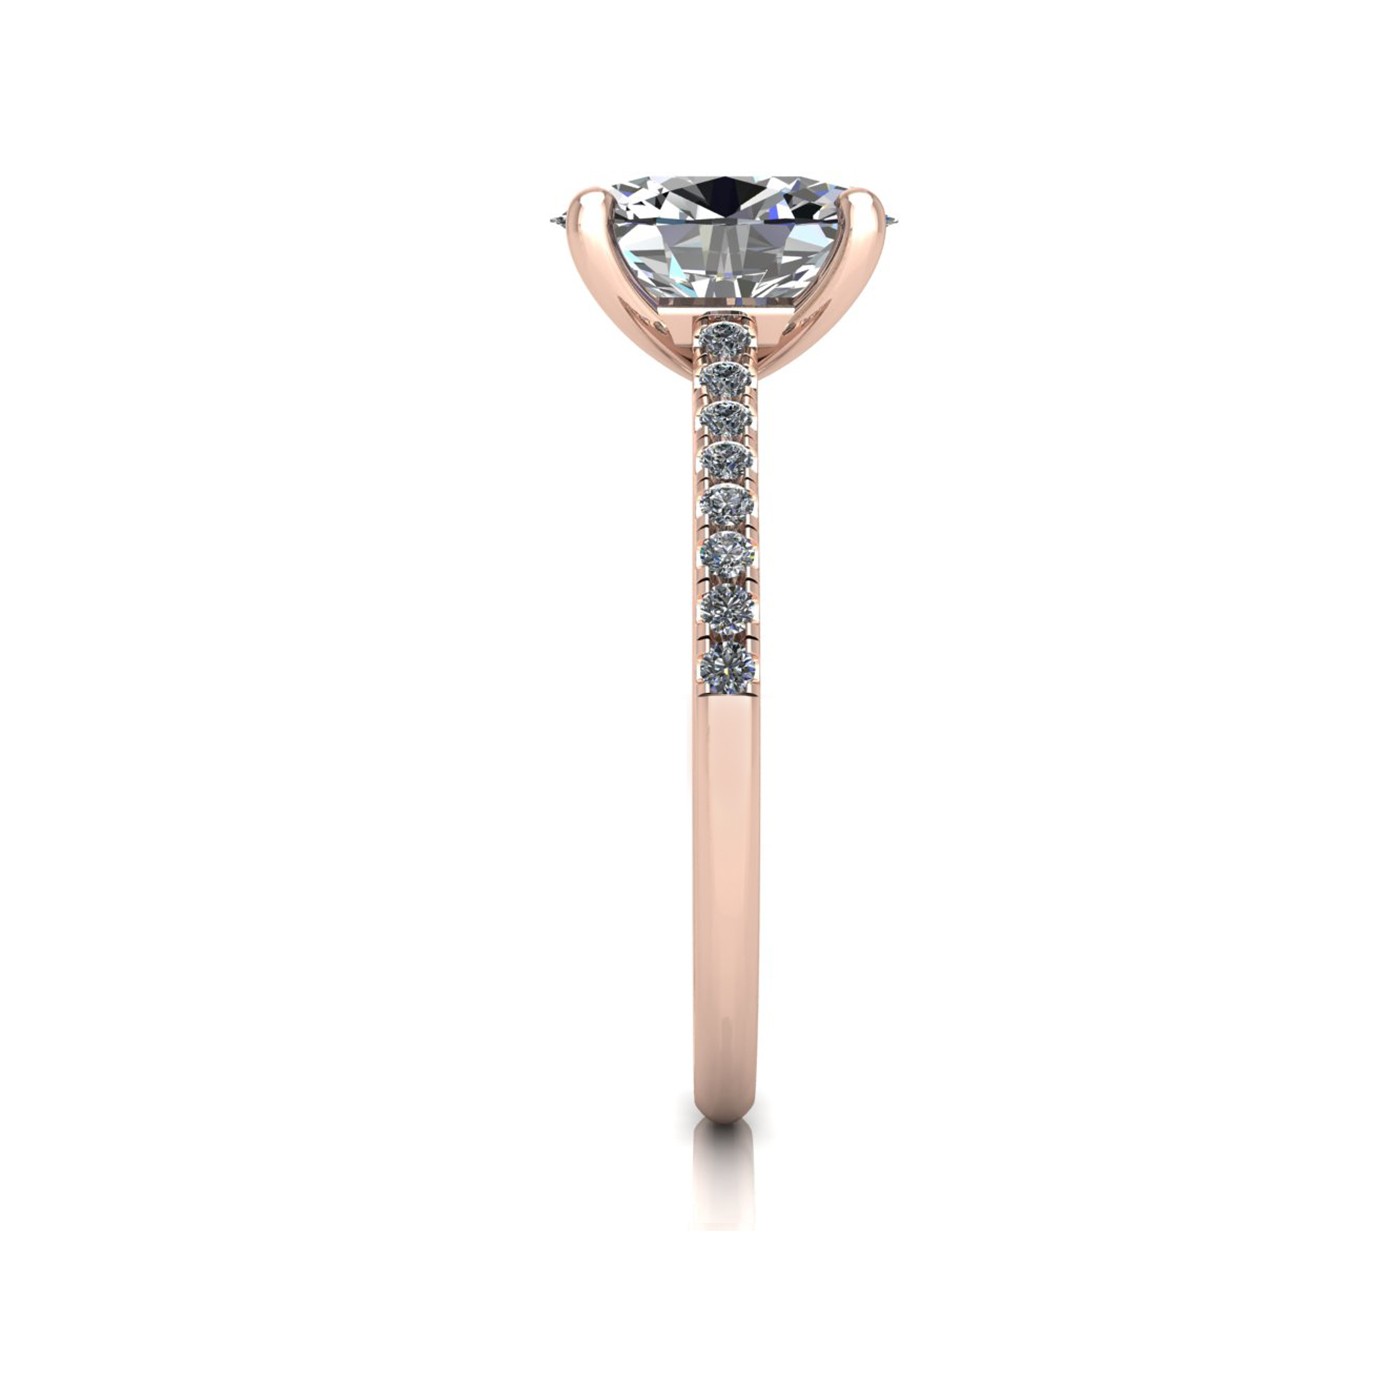 18k rose gold  1,50 ct 4 prongs oval cut diamond engagement ring with whisper thin pavÉ set band